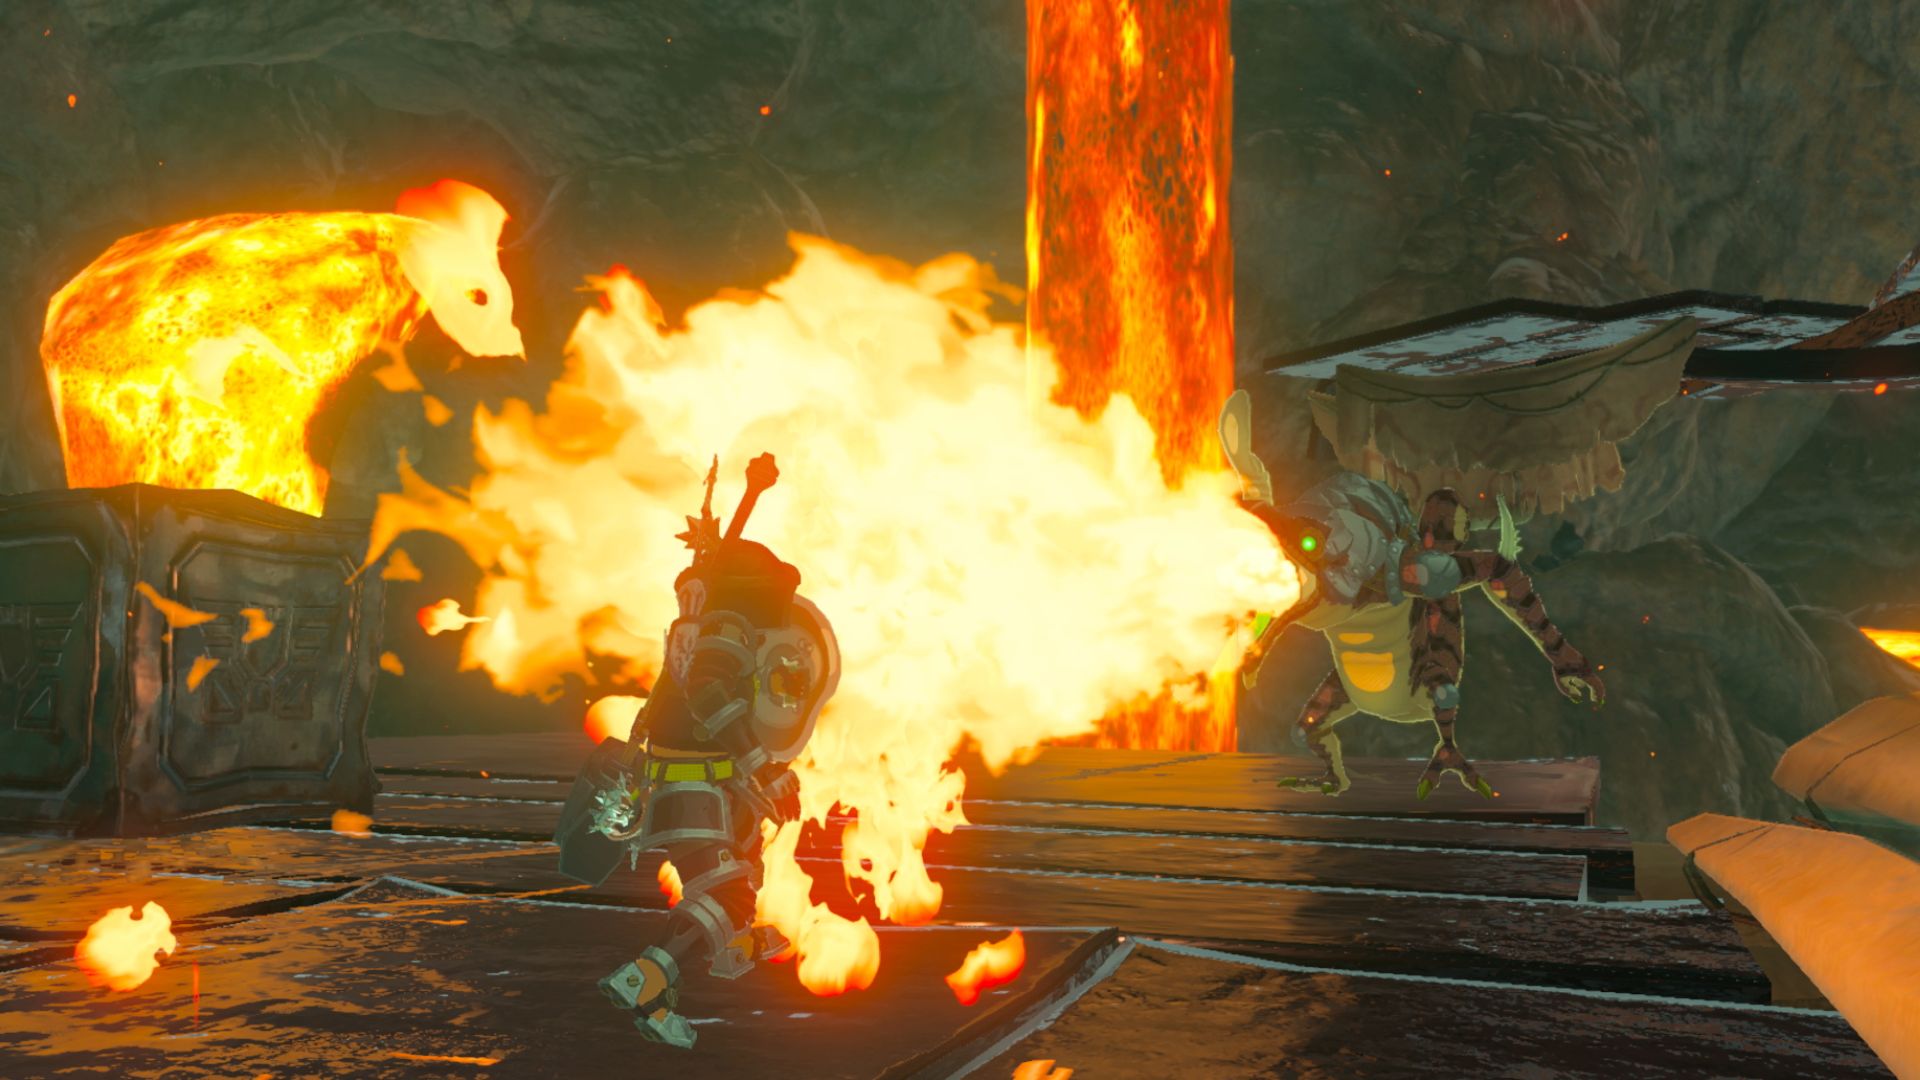 Best monster games: The Legend of Zelda: Breath of the Wild. Image shows Link blocking a firey attack from a Lizalfos.